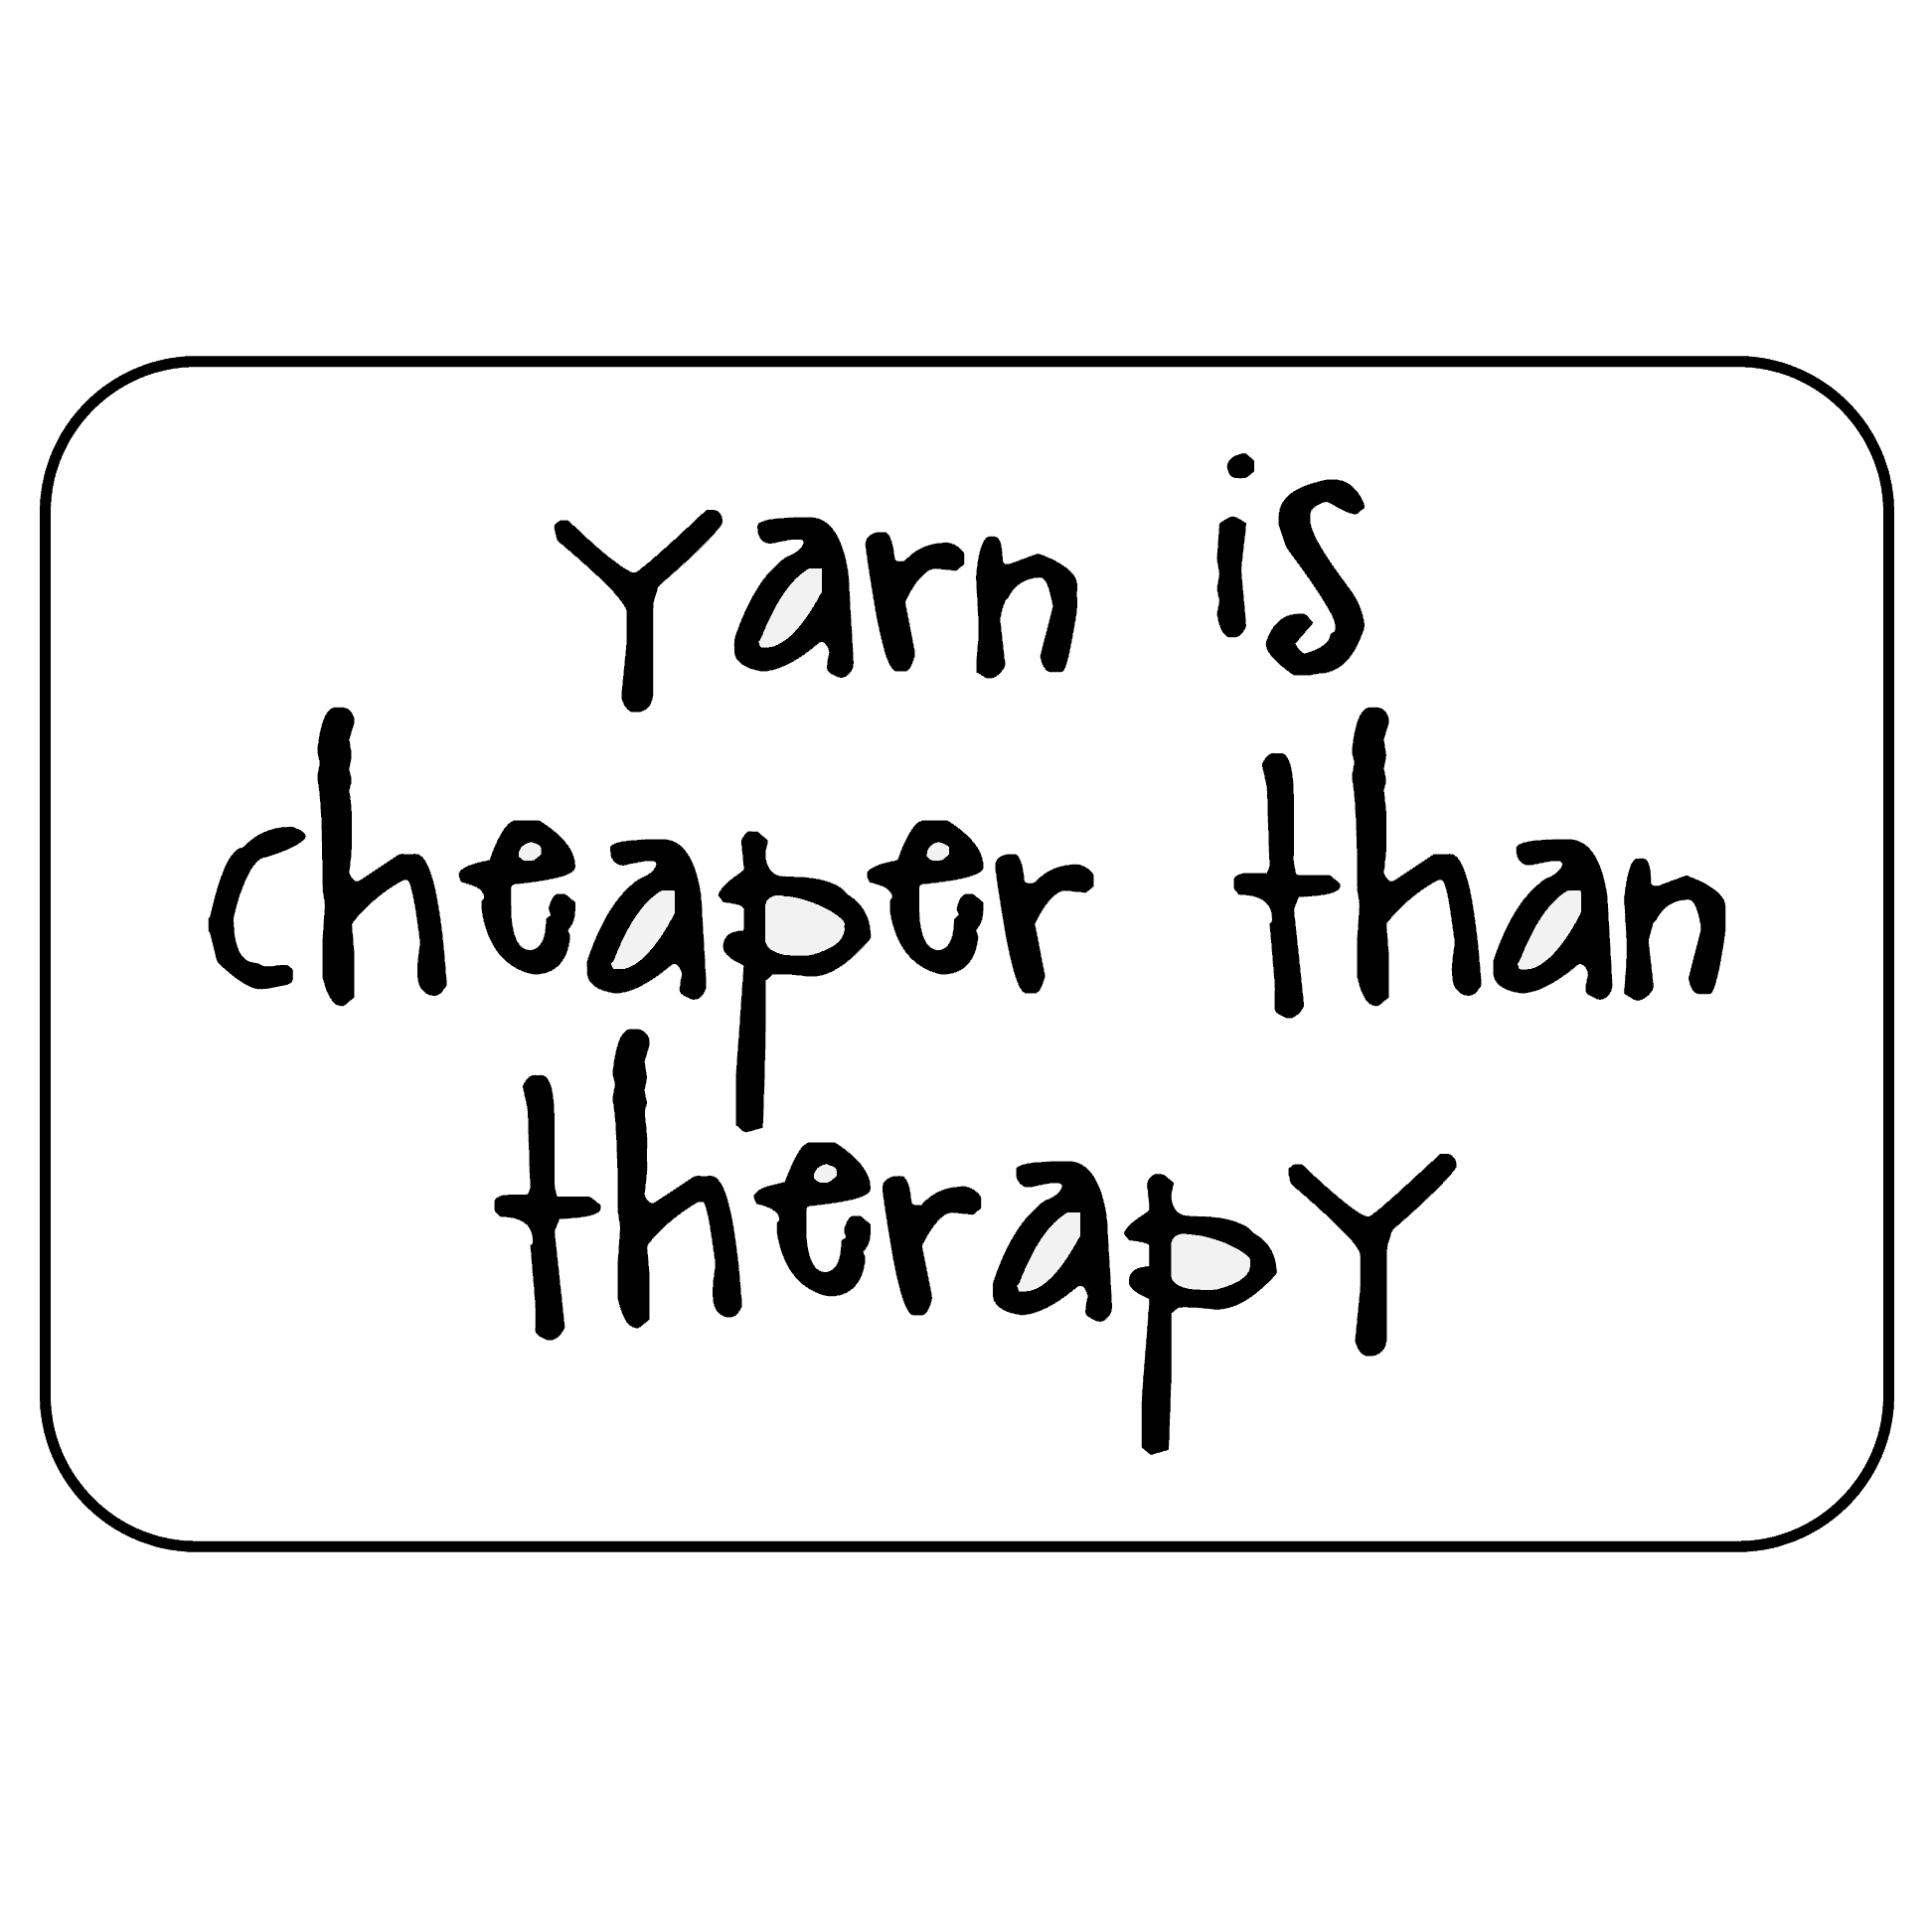 https://pawleystudios.com/wp-content/uploads/2021/03/yarn-is-cheaper-than-therapy-01.png